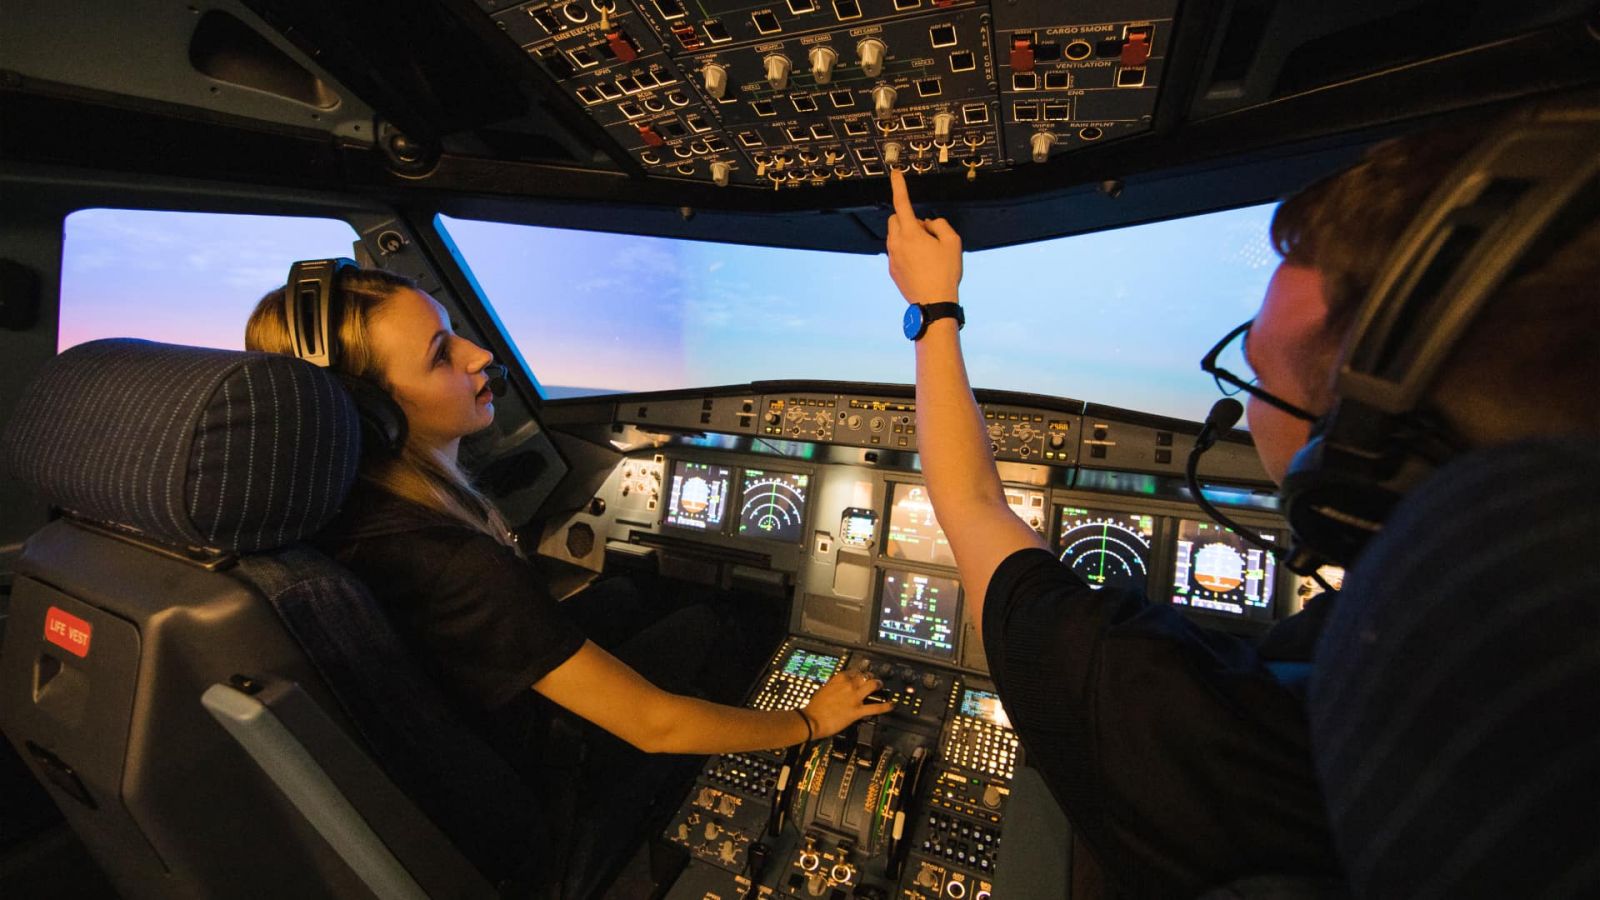 Flight skills, automation management both important for today’s pilots